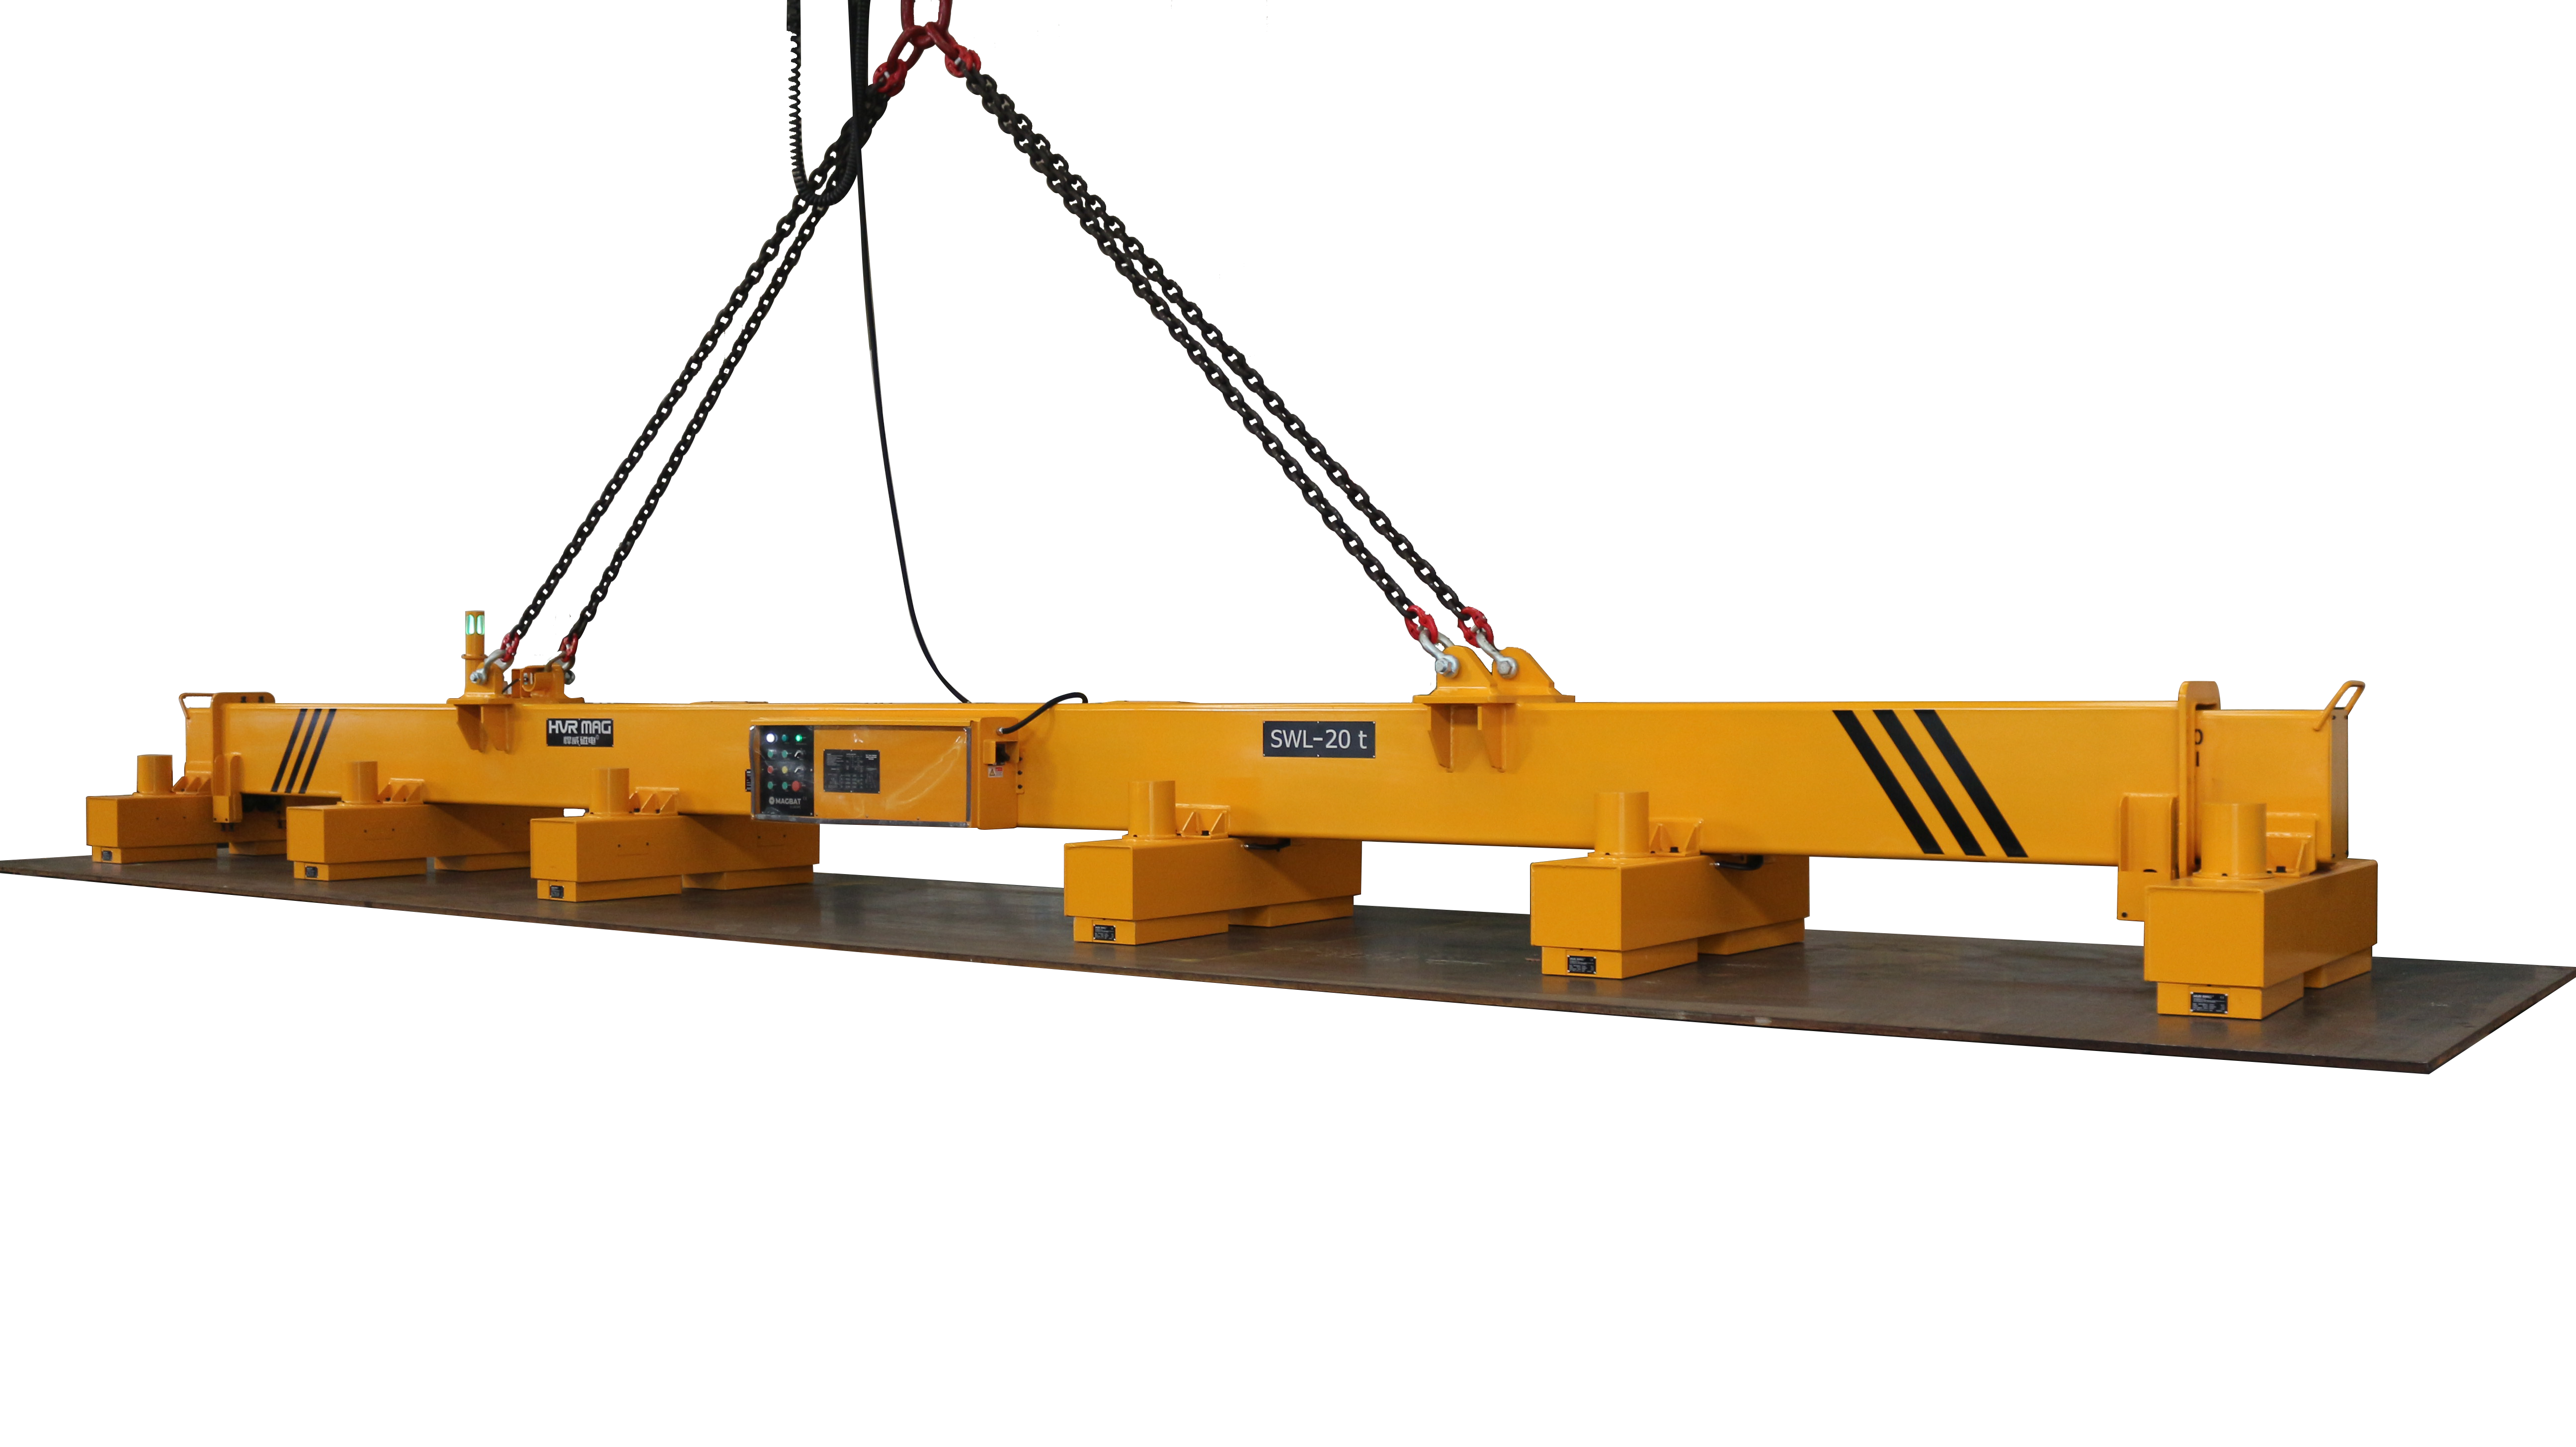 electrically swithced permanent electromagnet lifting beam - 20 ton - HVR MAG